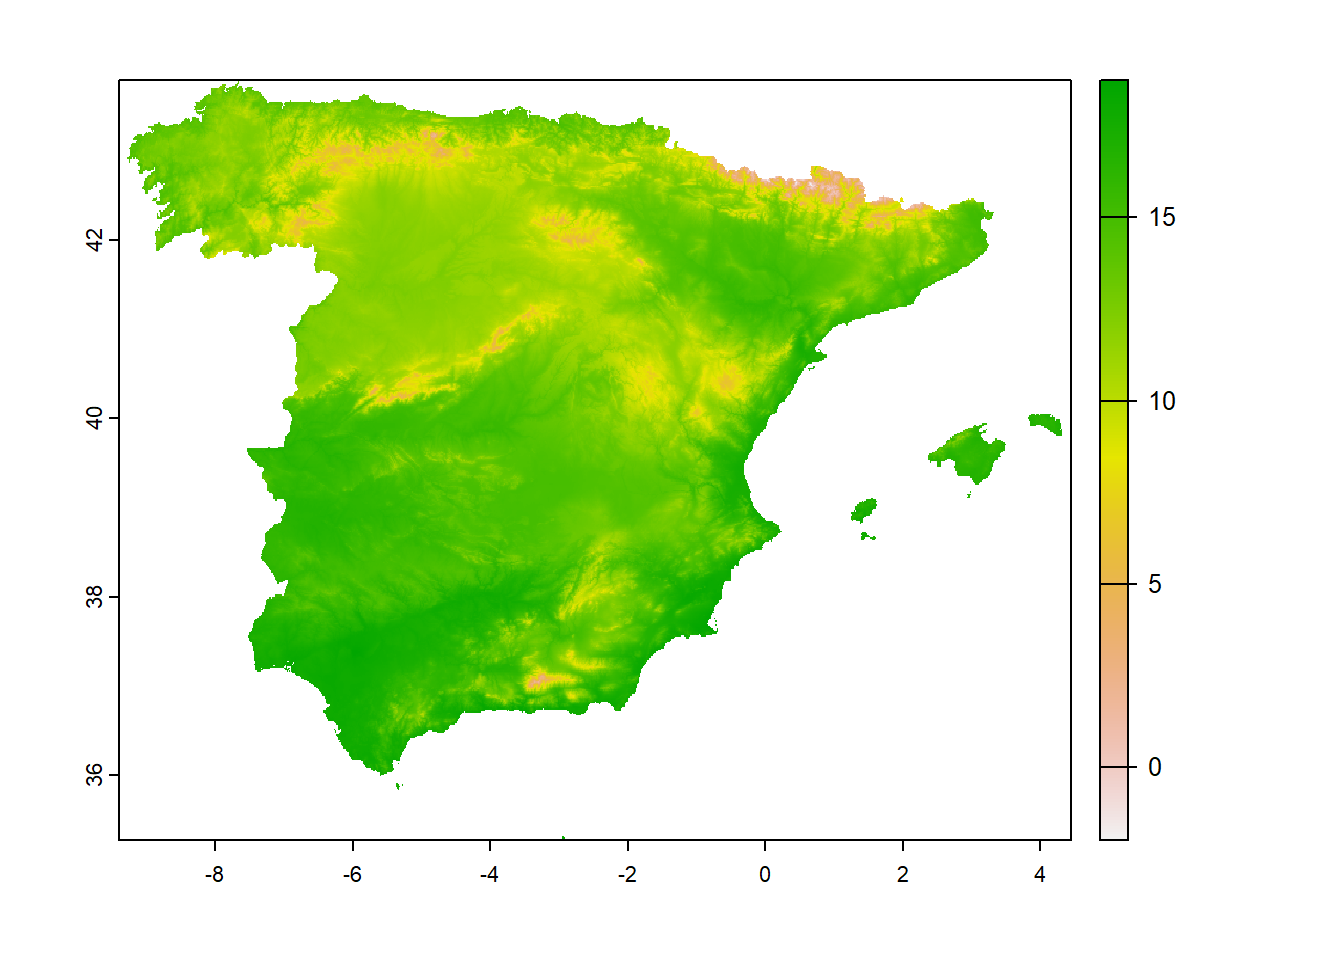 Masked raster representing the average annual temperature in Spain.